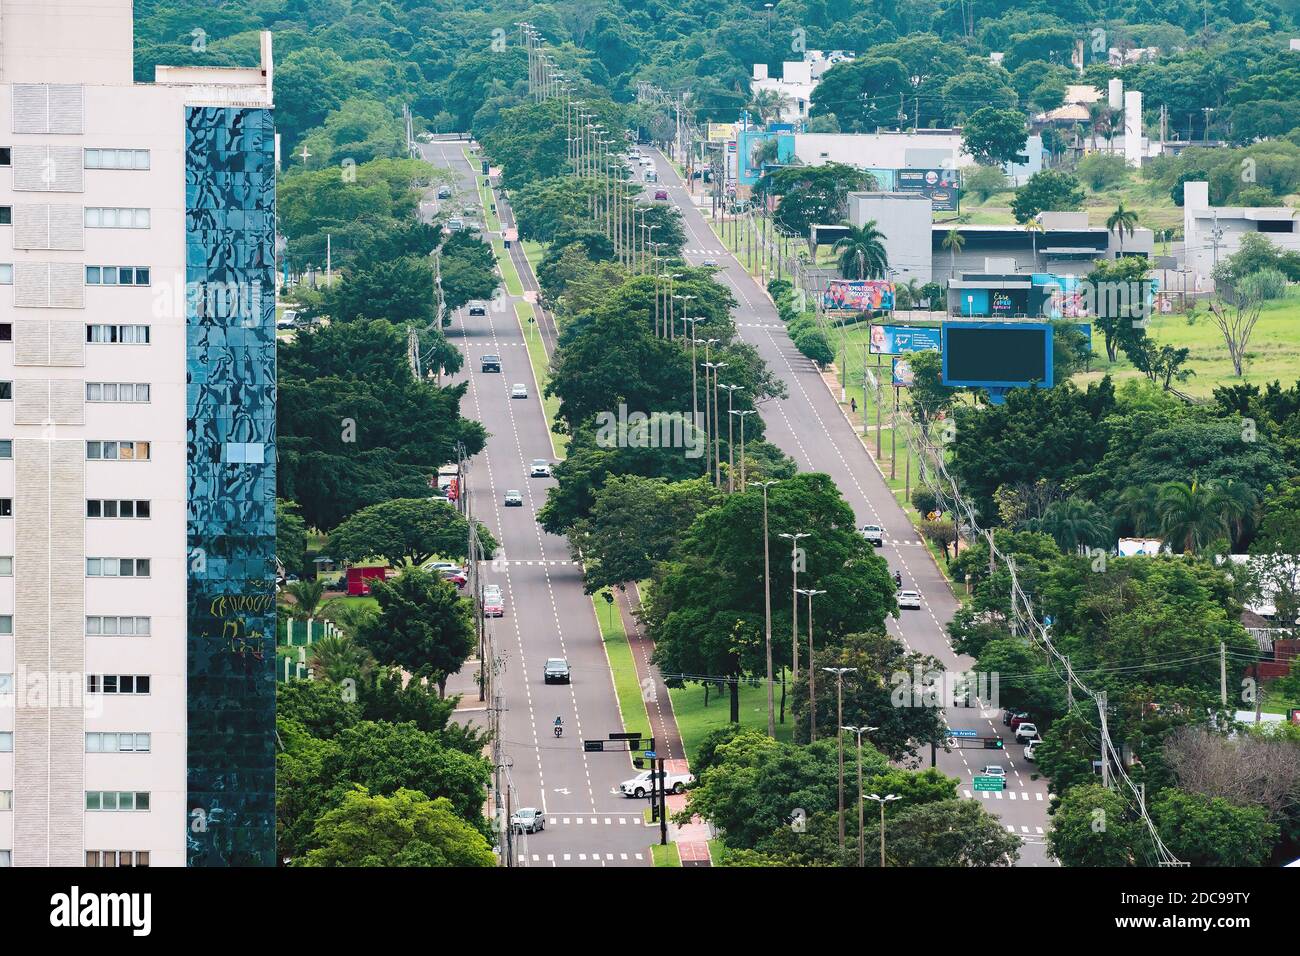 Campo Grande - MS, Brazil - november 12, 2020: Aerial view of the highs of the Afonso Pena avenue and the Parque dos Poderes park on the background. Stock Photo